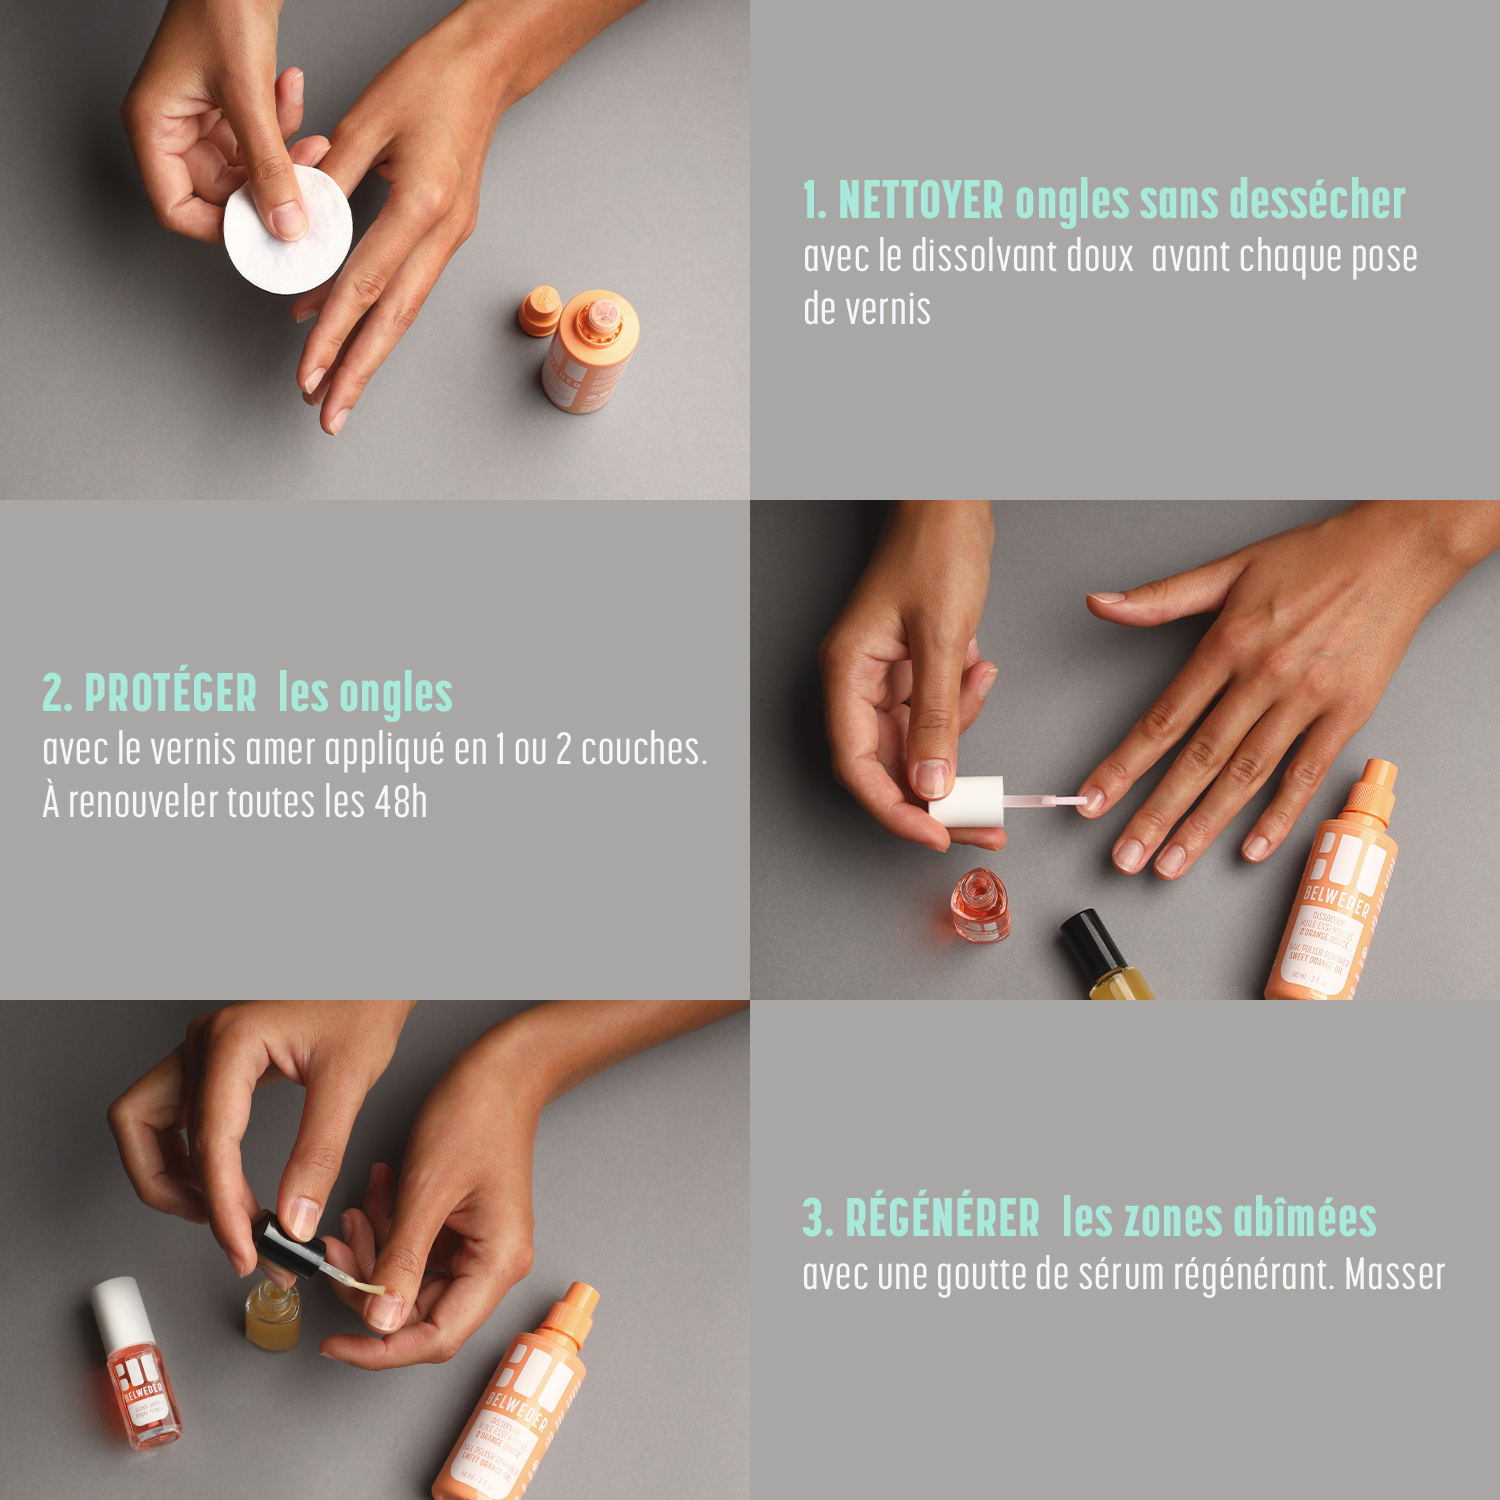 KIT SOIN DES ONGLES<br>SOS ONGLES RONGÉS Coffrets